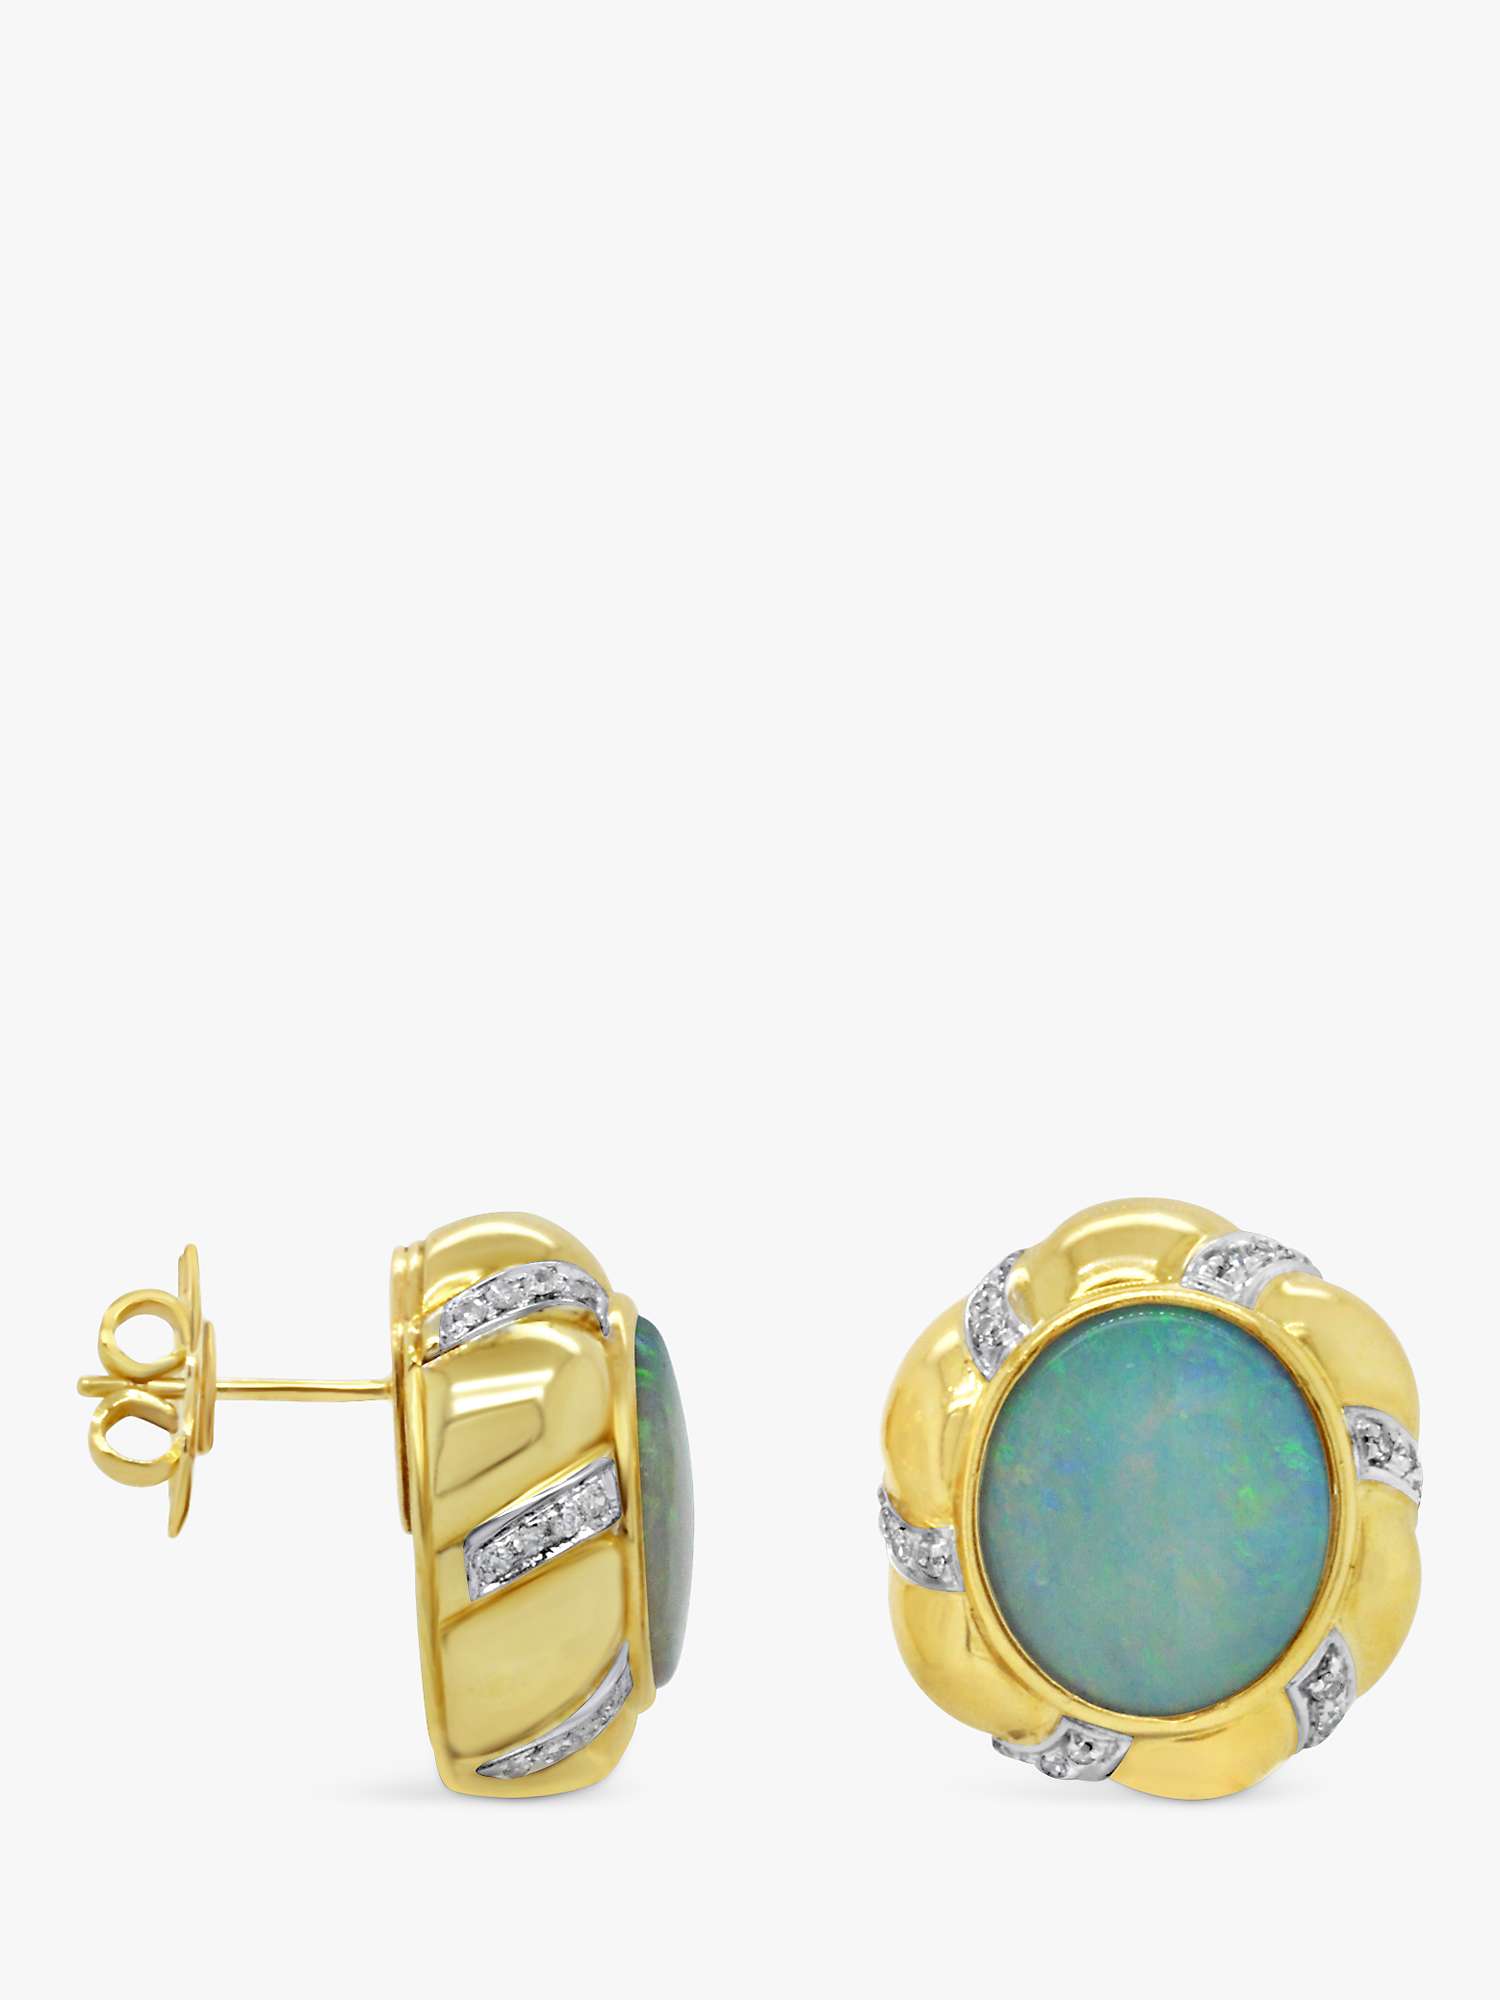 Buy Milton & Humble Jewellery Second Hand 18ct Yellow Gold Opal & Diamond Stud Earrings, Gold Online at johnlewis.com